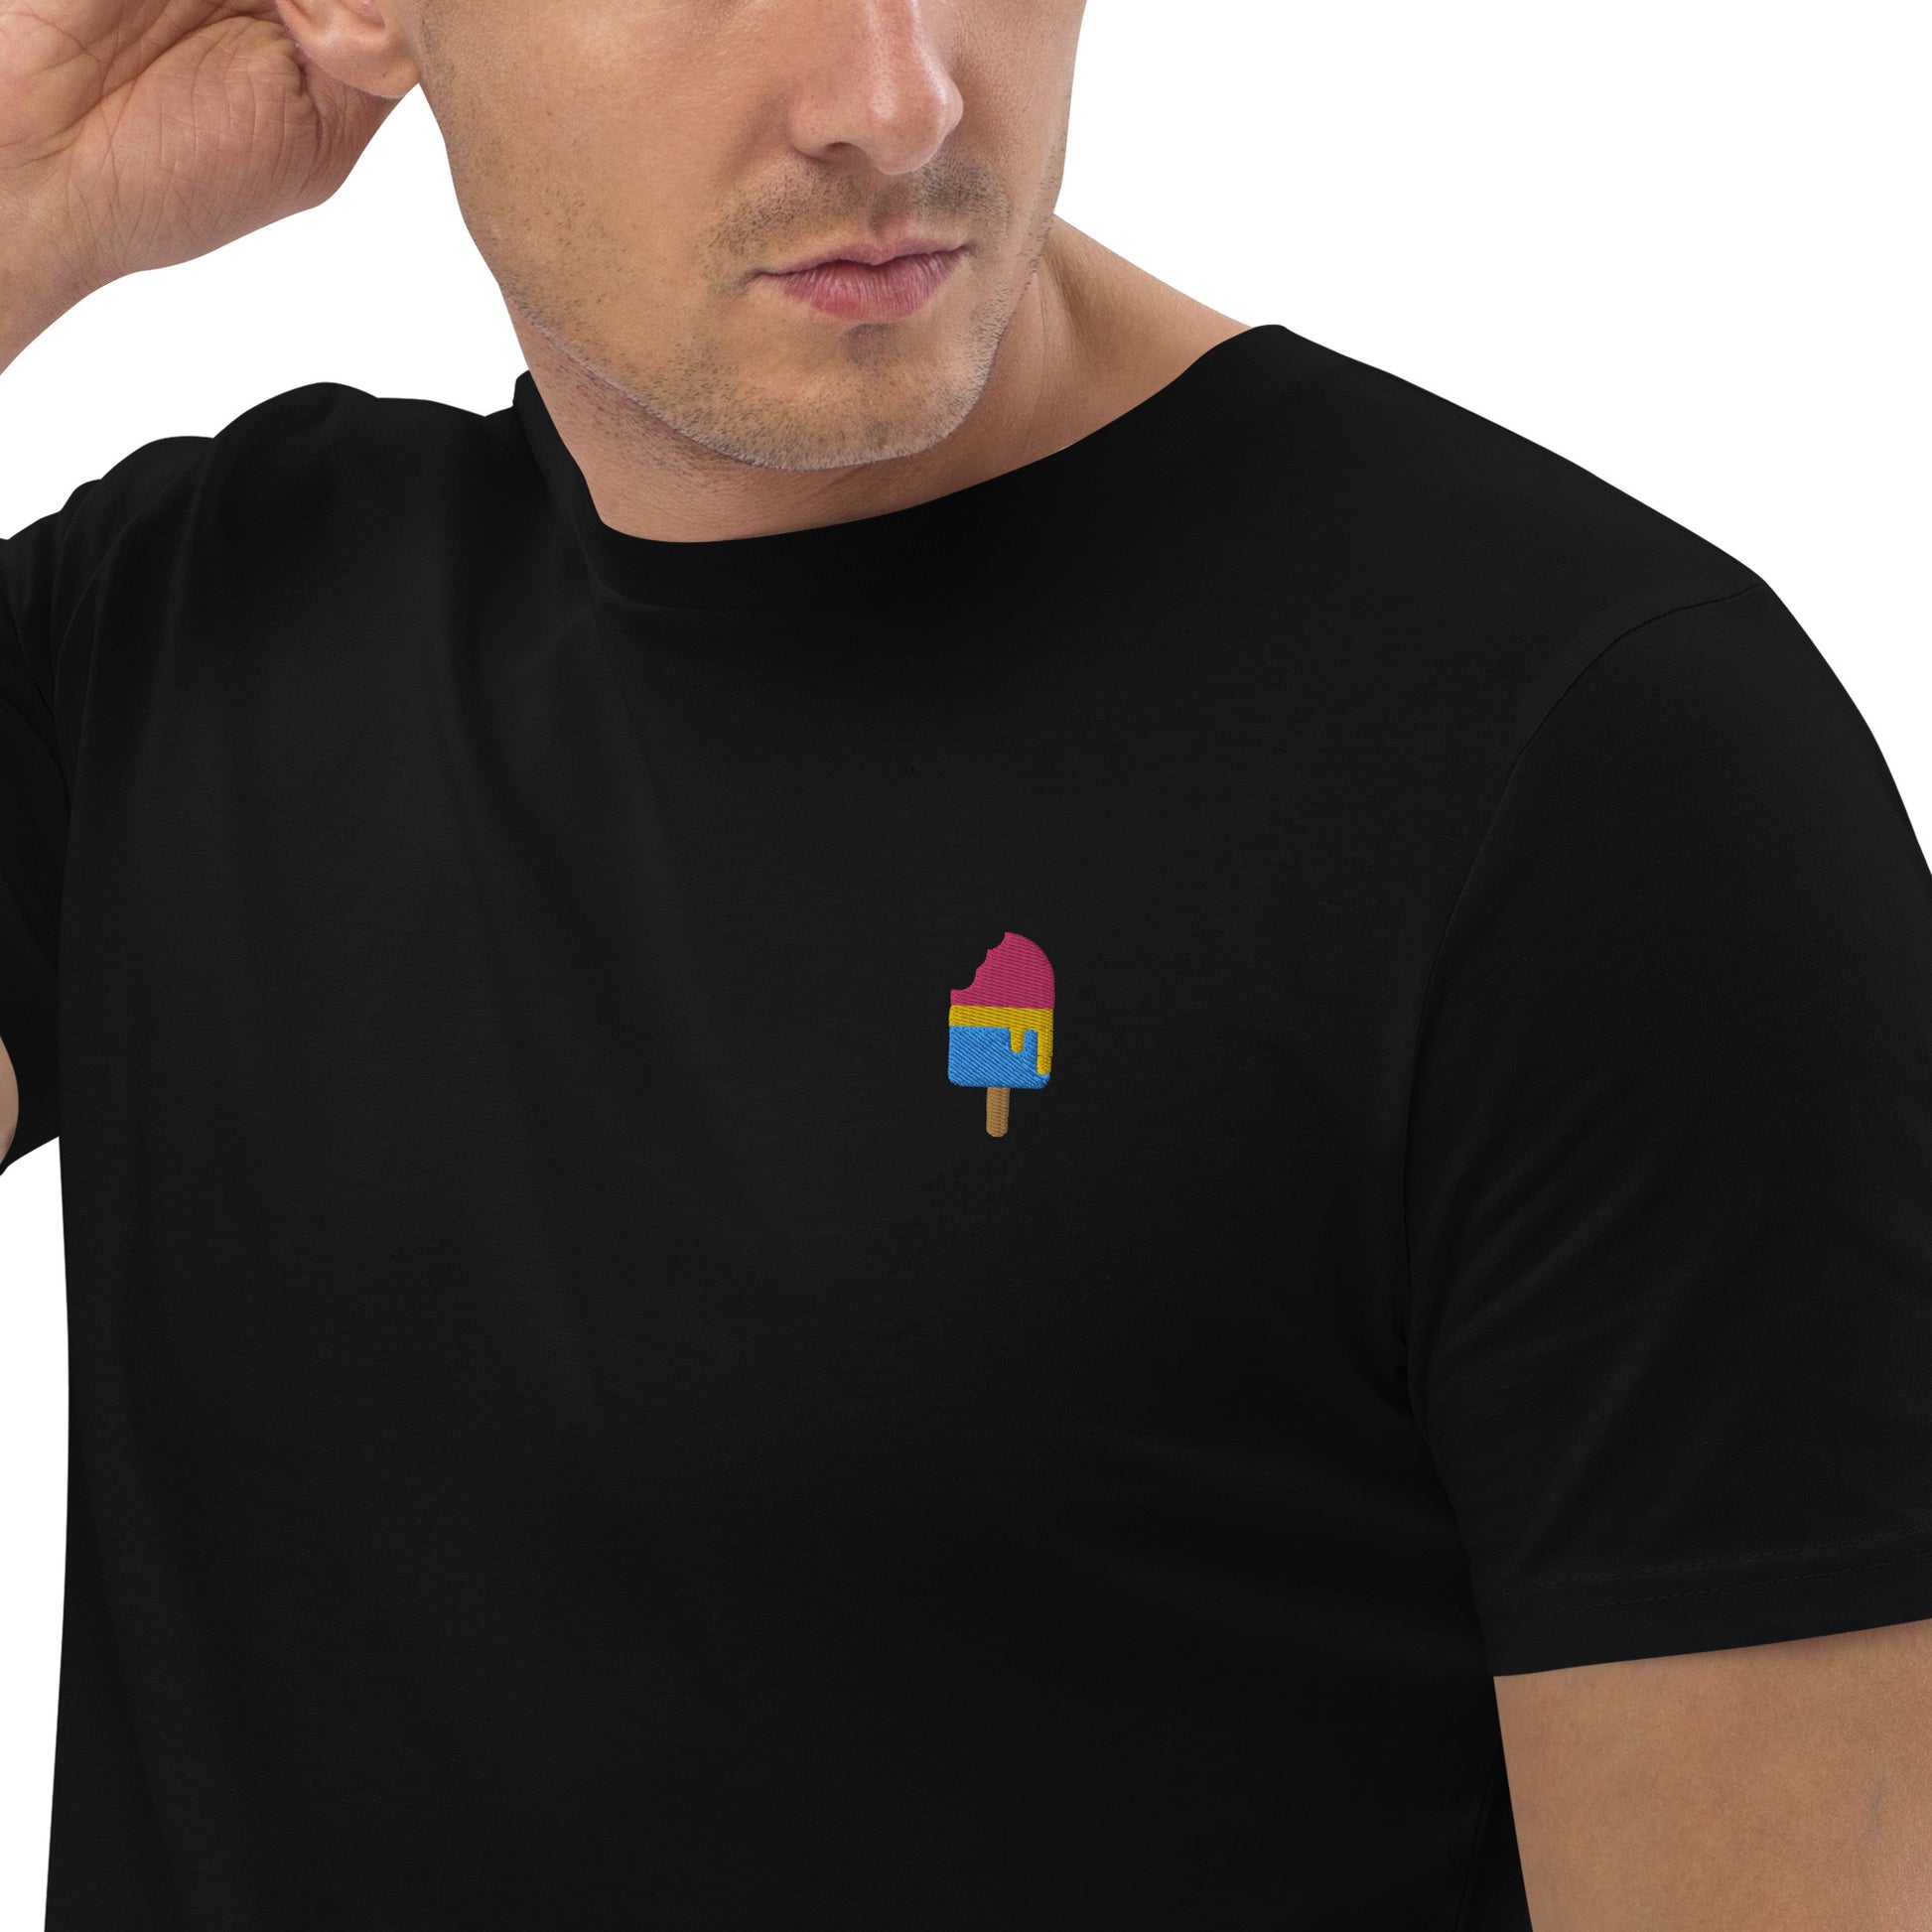 Male model wearing fitted black organic cotton t-shirt with a small embroidered ice cream in pansexual colors on the left chest. Available in sizes S to 3XL.